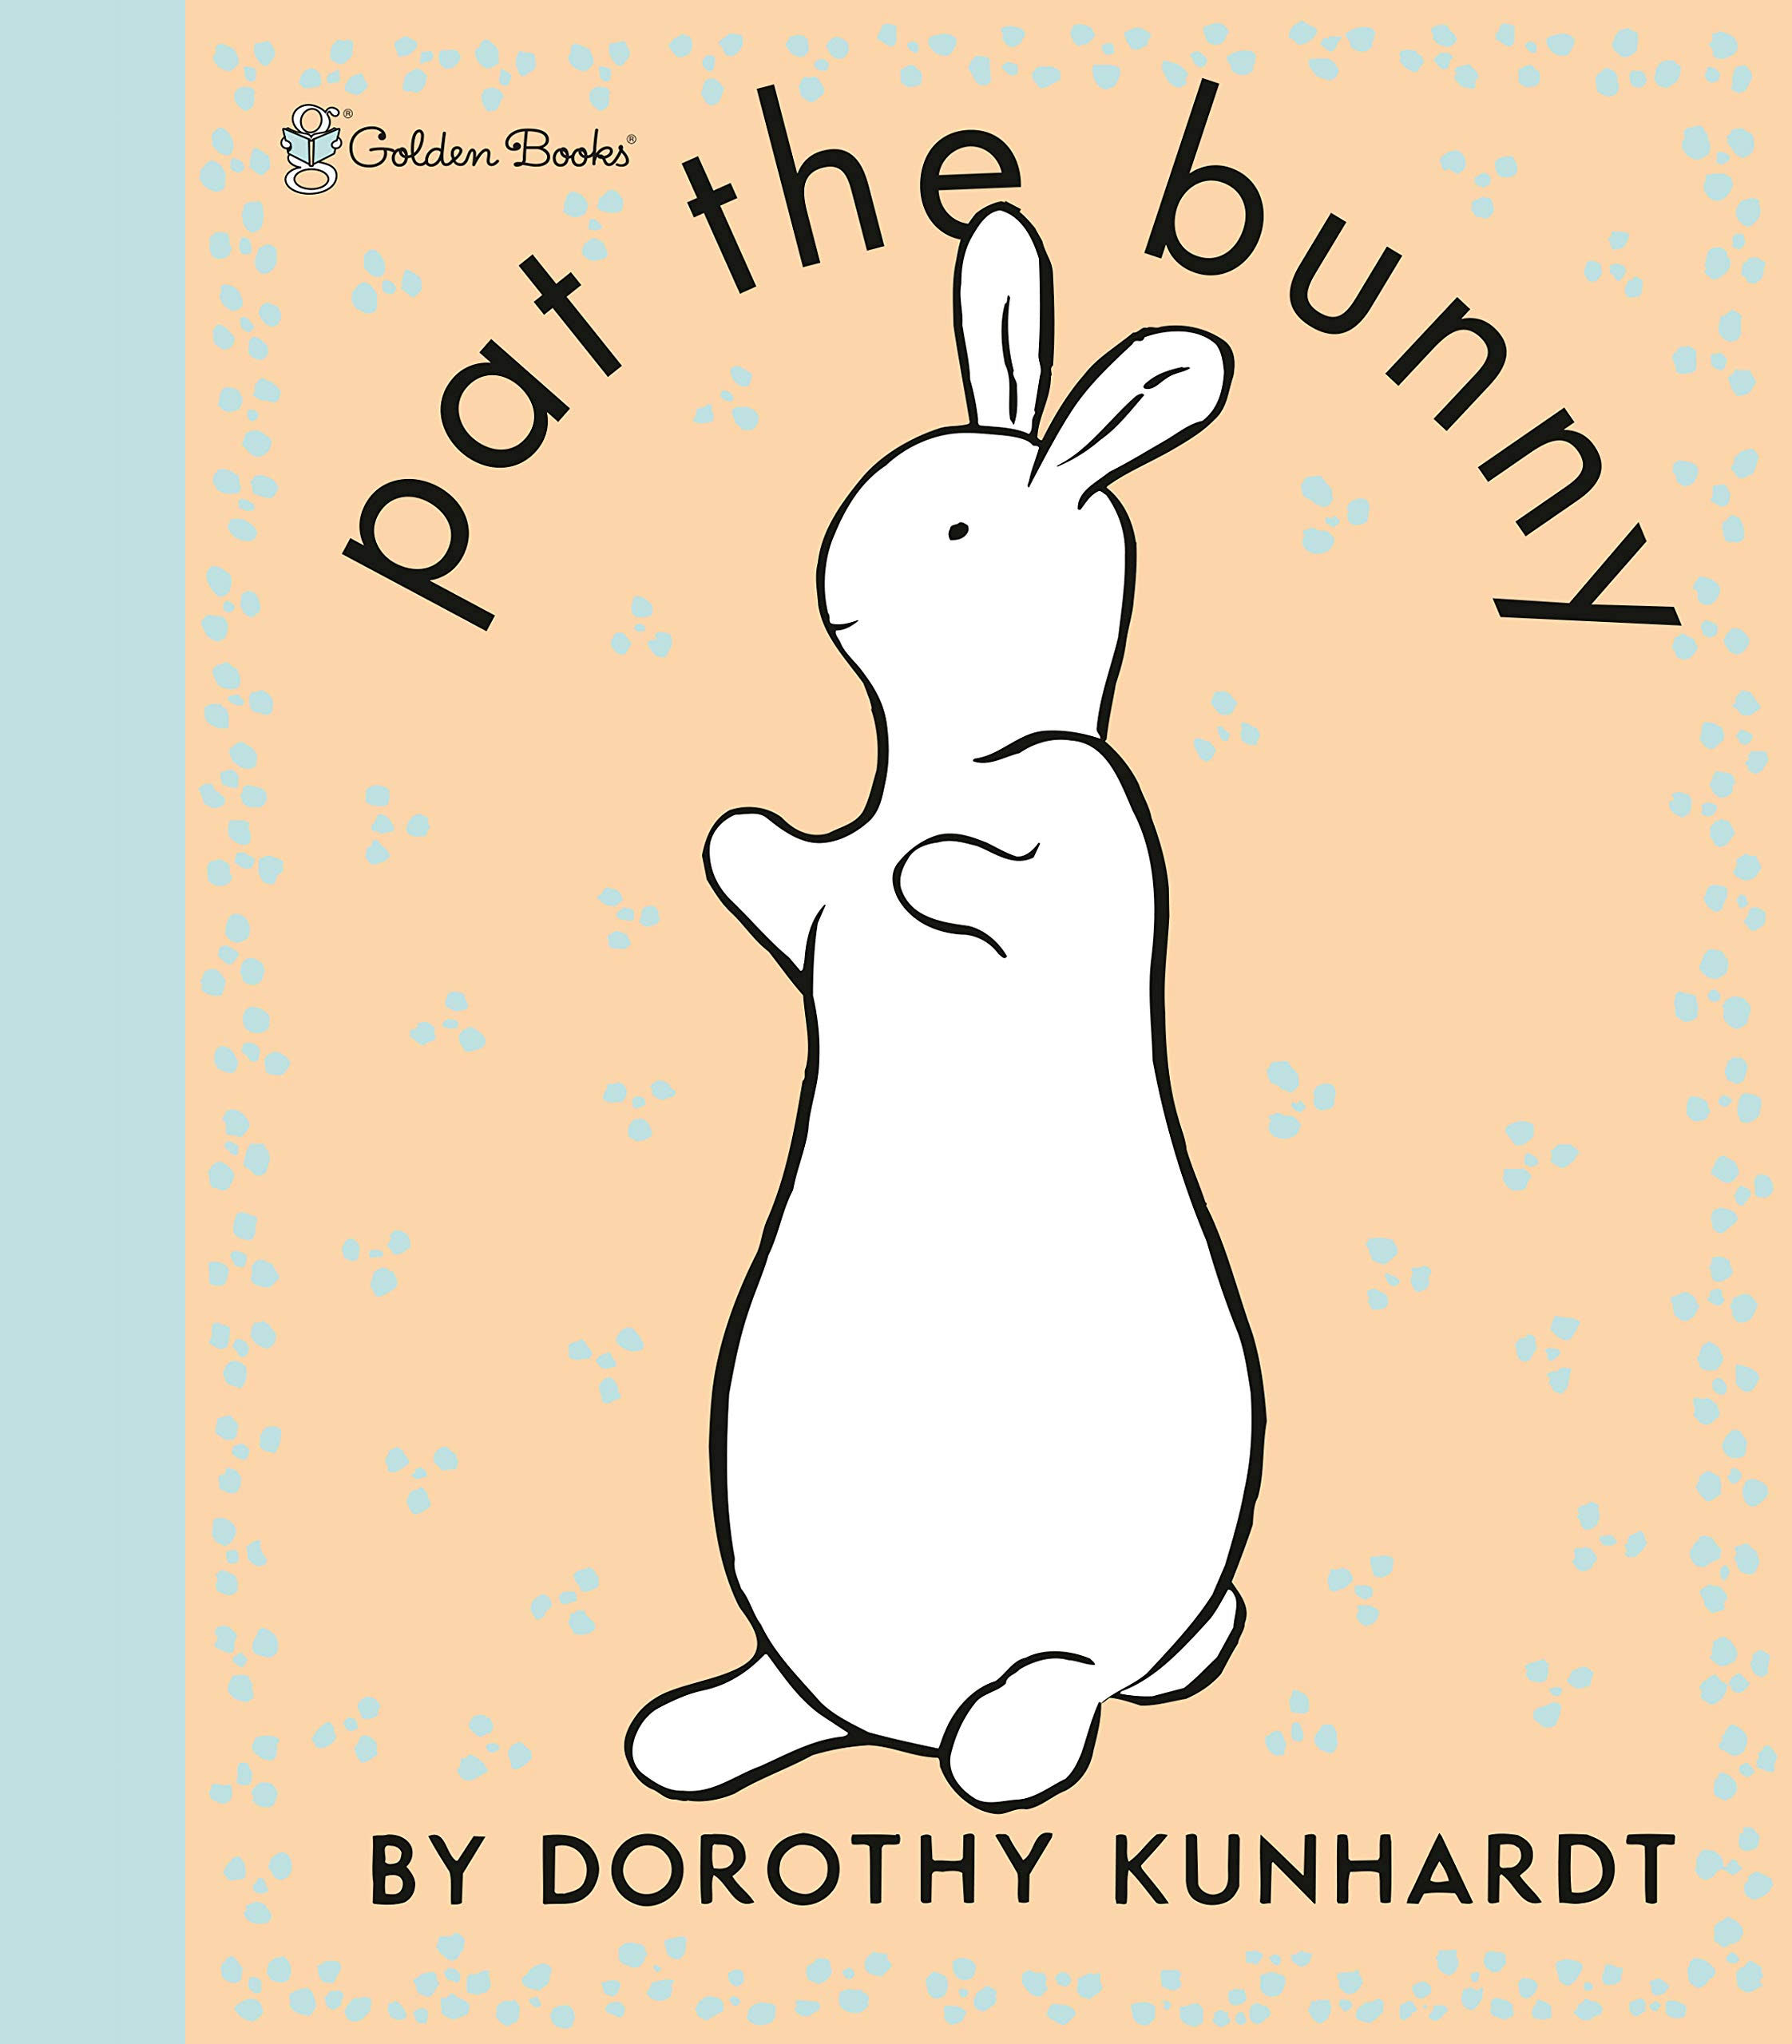 Pat the Bunny Deluxe Edition - Dorothy Kunhardt